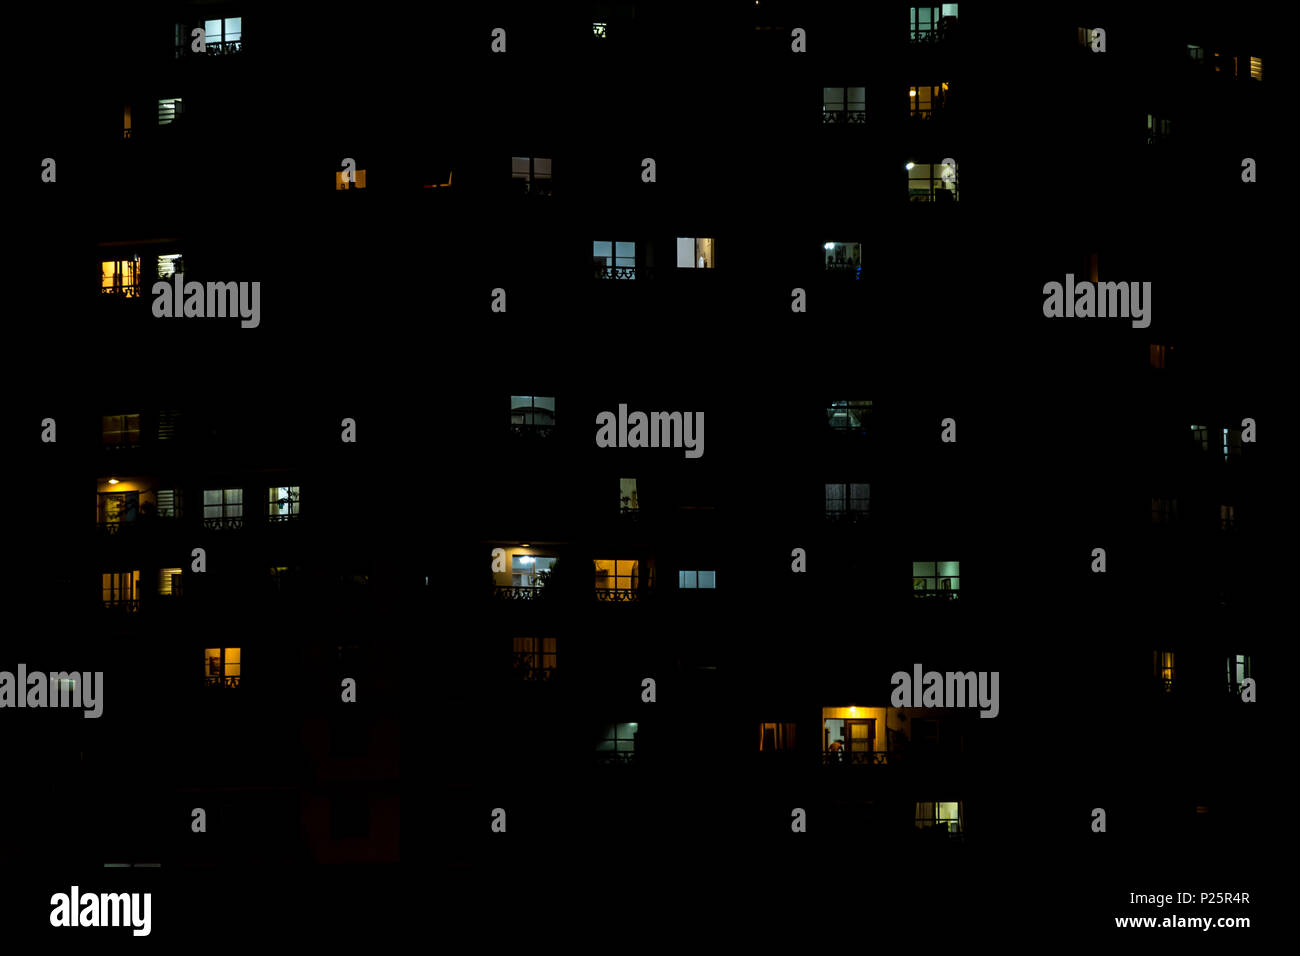 multiple windows of an apartment building at night. Some yellow, some blue, some light on, some light off. Stock Photo